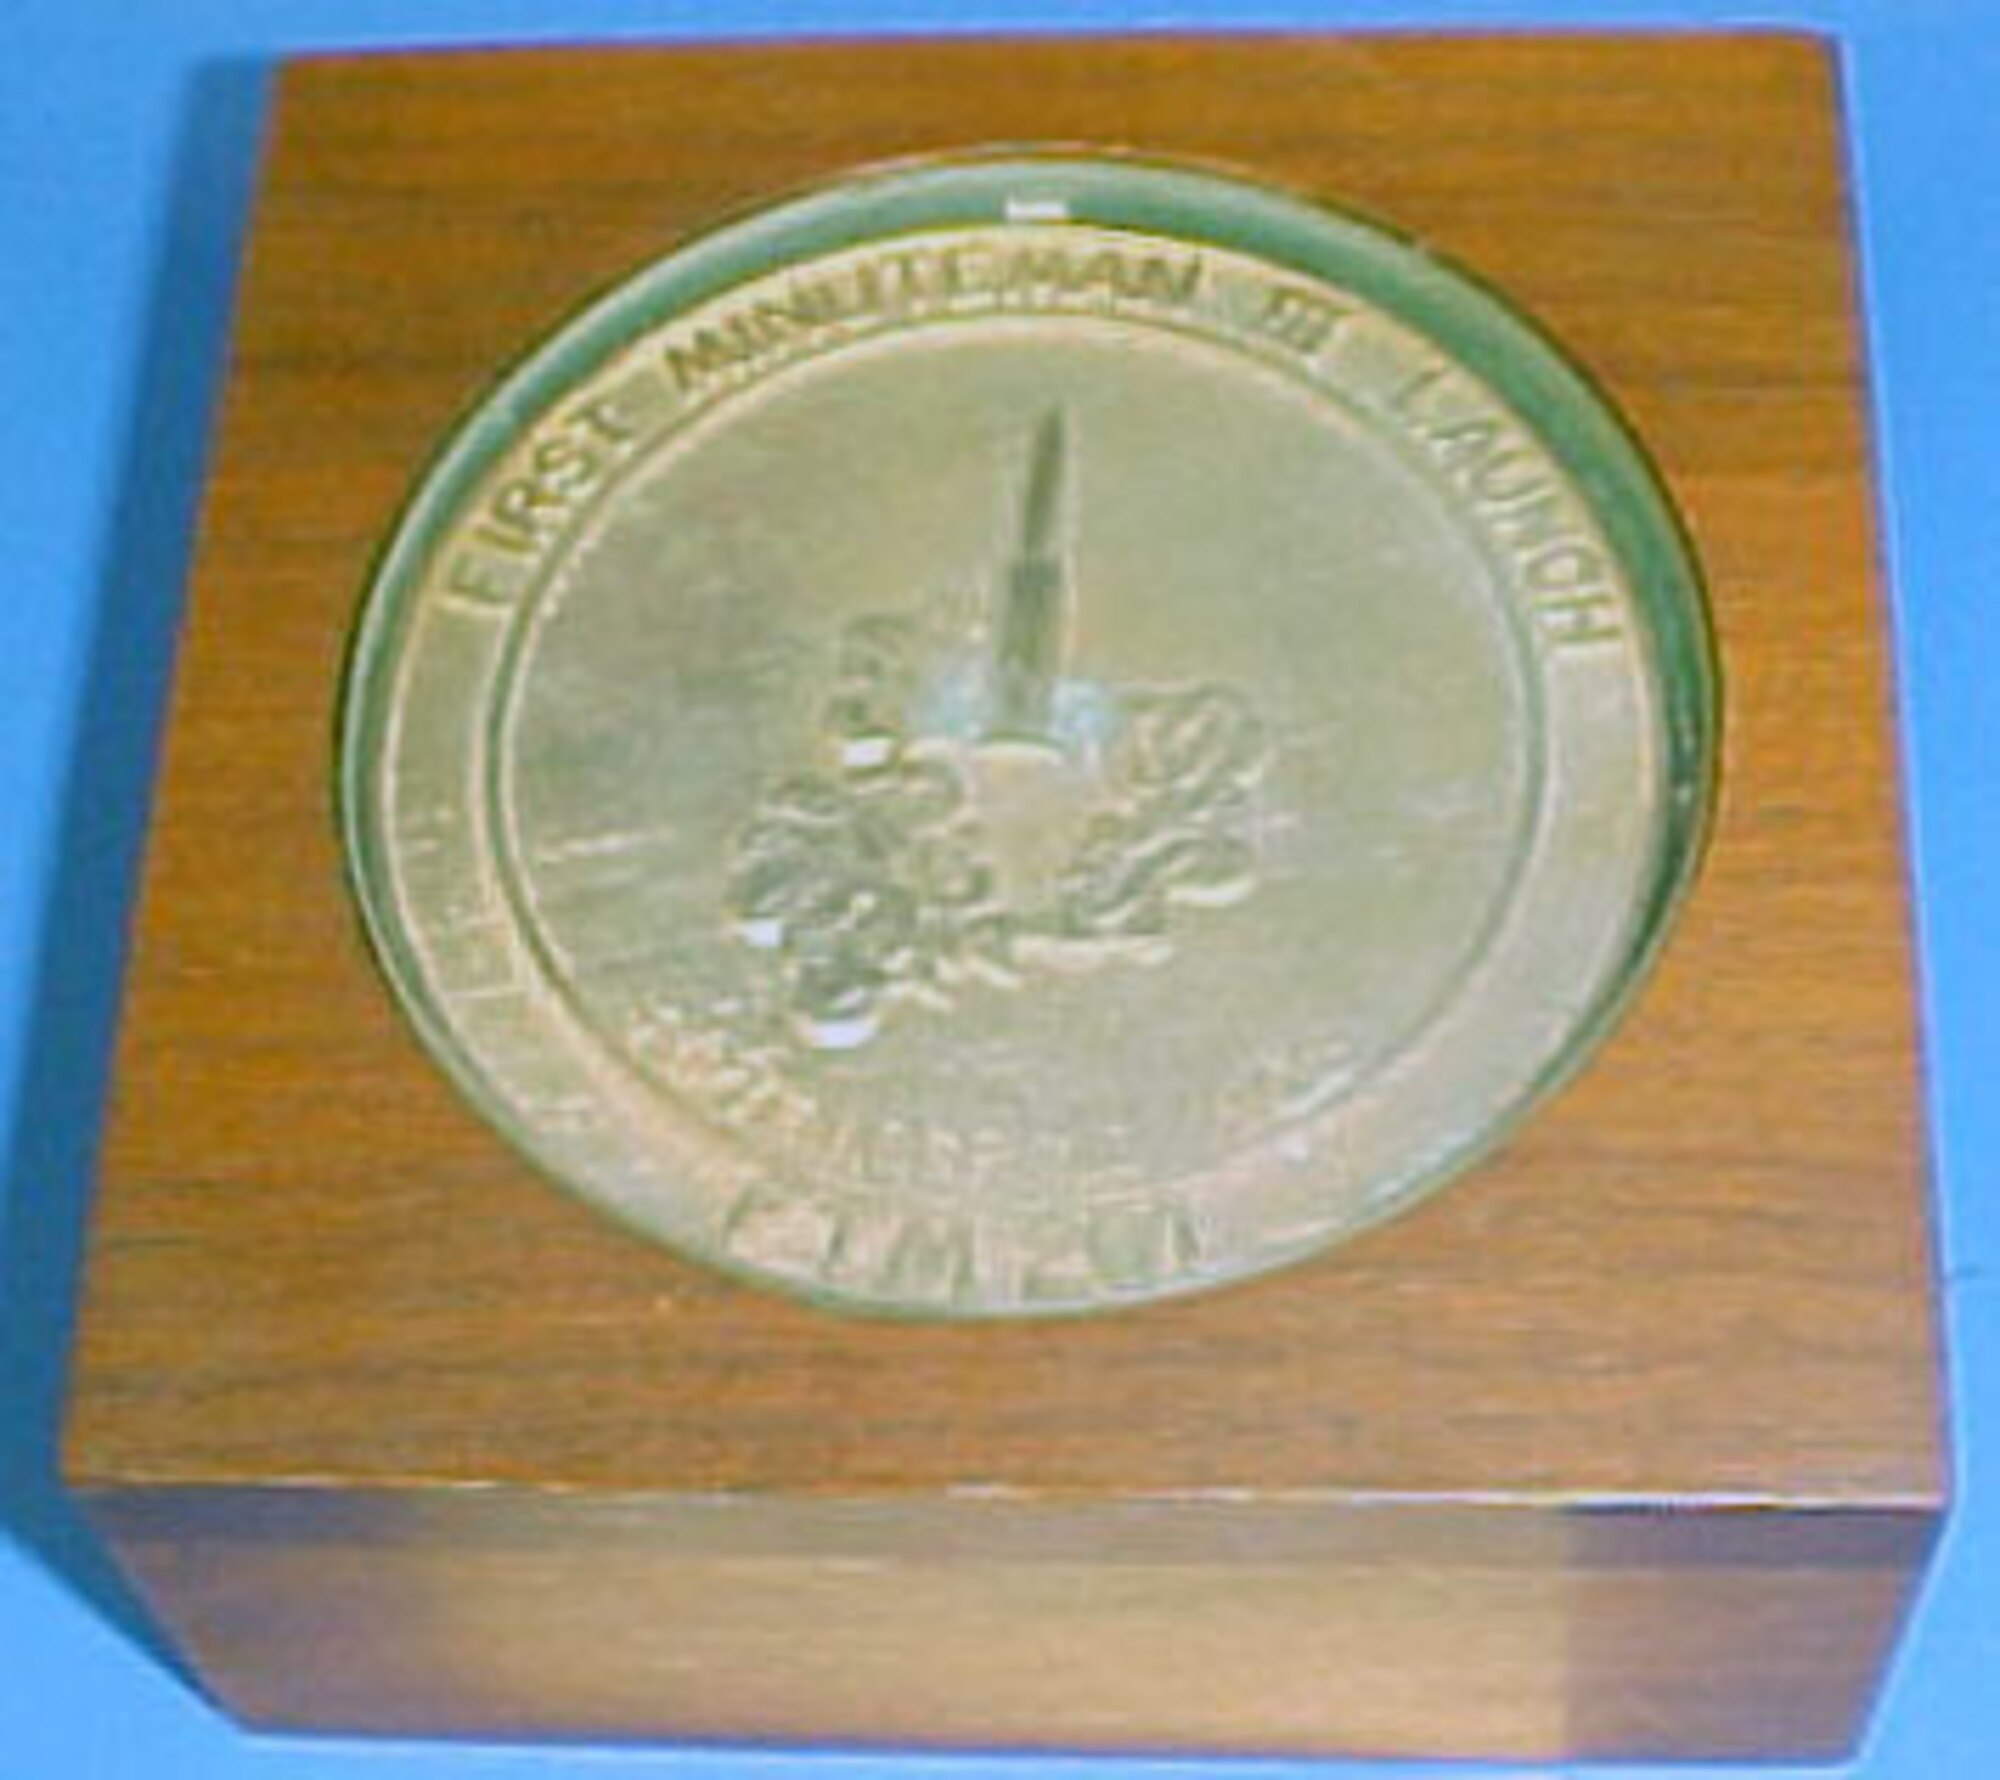 This commemorative coin shows an image of a rocket launch and says "First Minuteman III Launch, September 16, 1968, FTM 201." (U.S. Air Force photo)